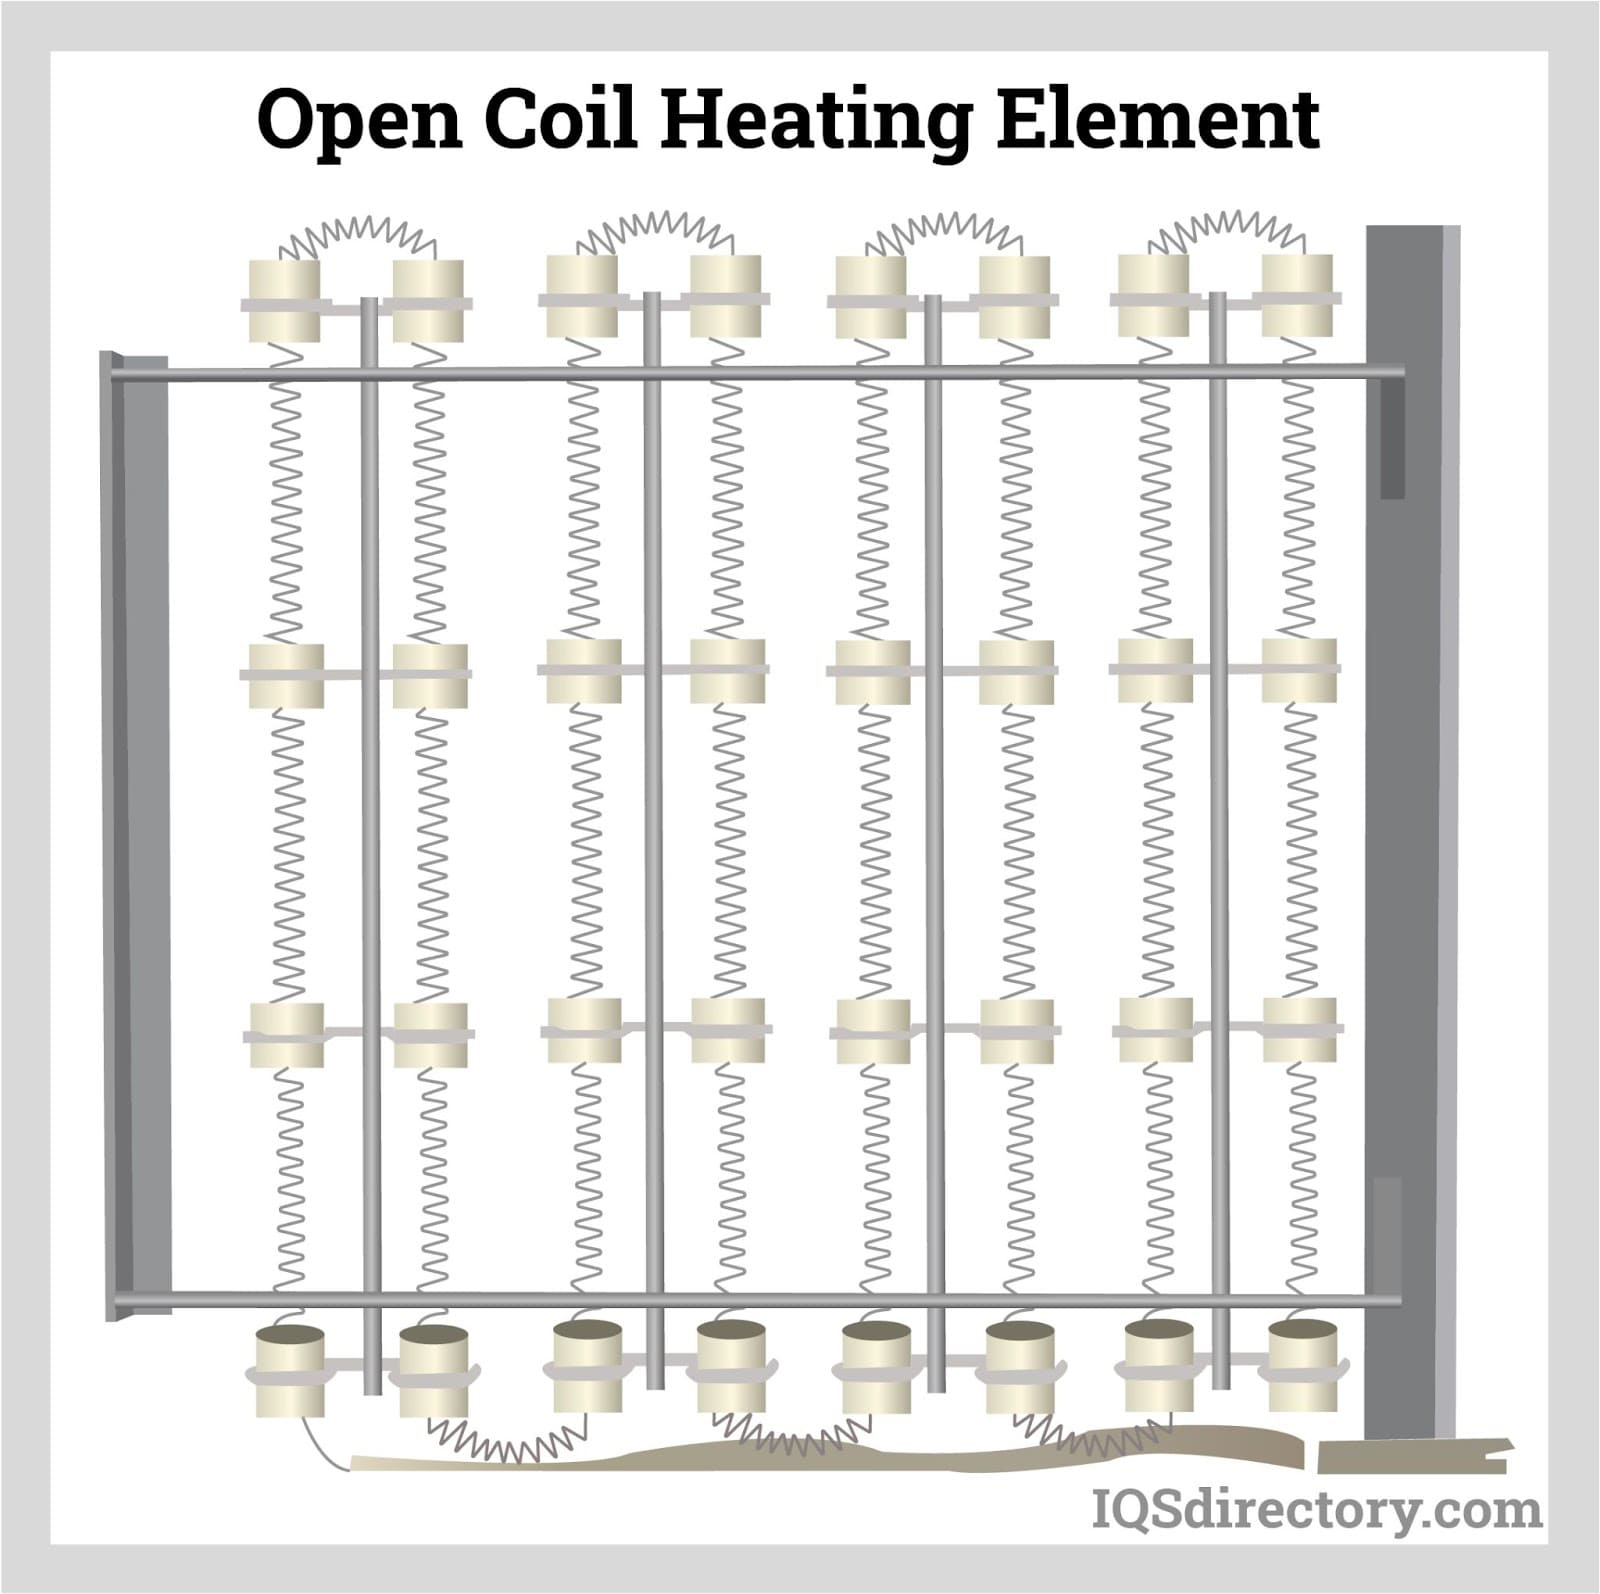  Open Coil Heating Element